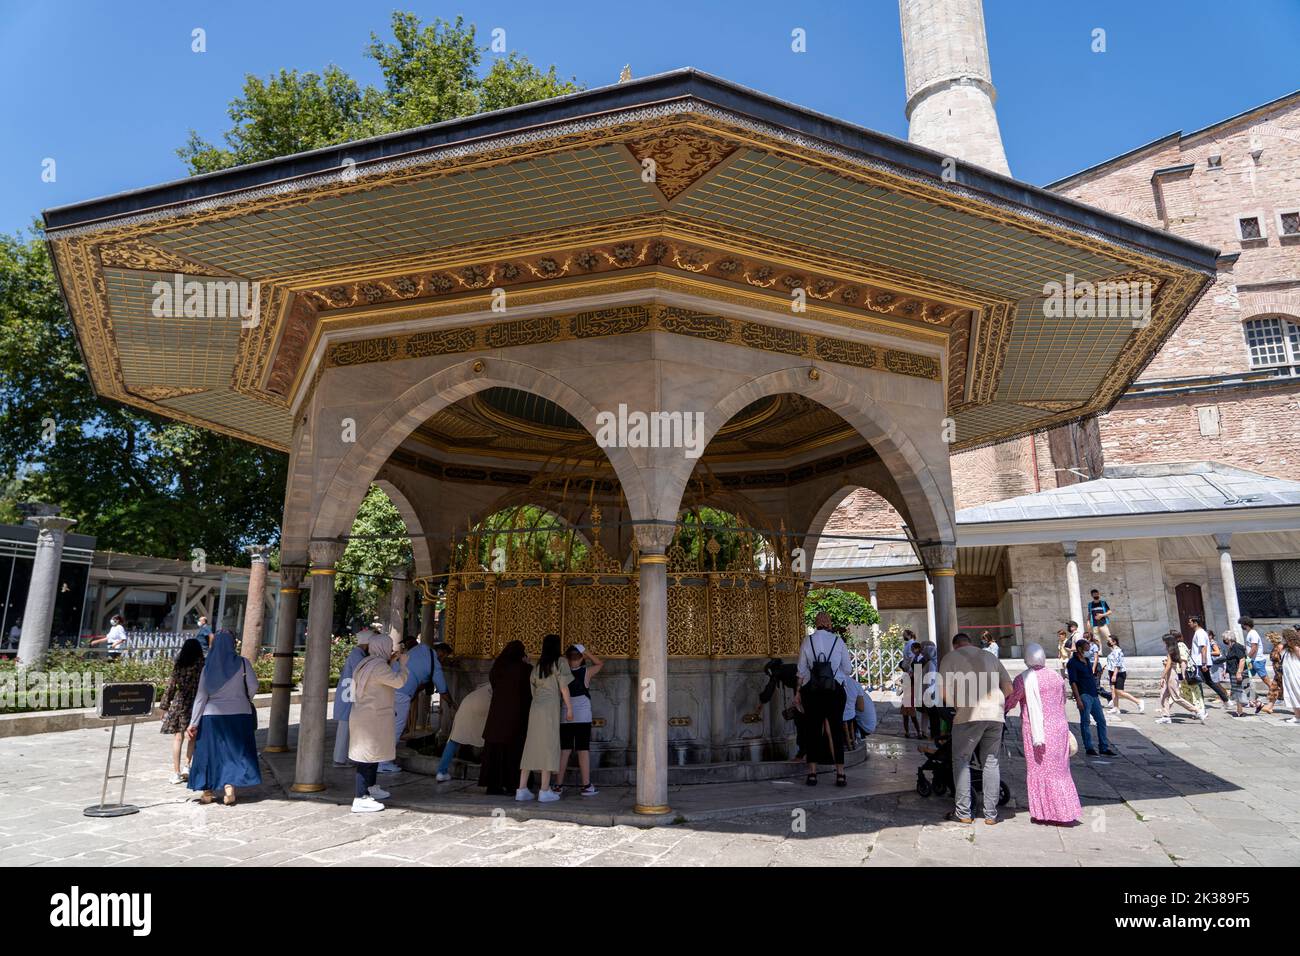 the Fountain of Sultan Ahmed III in the great square in front of the Imperial Gate of Top kapi Palace Stock Photo